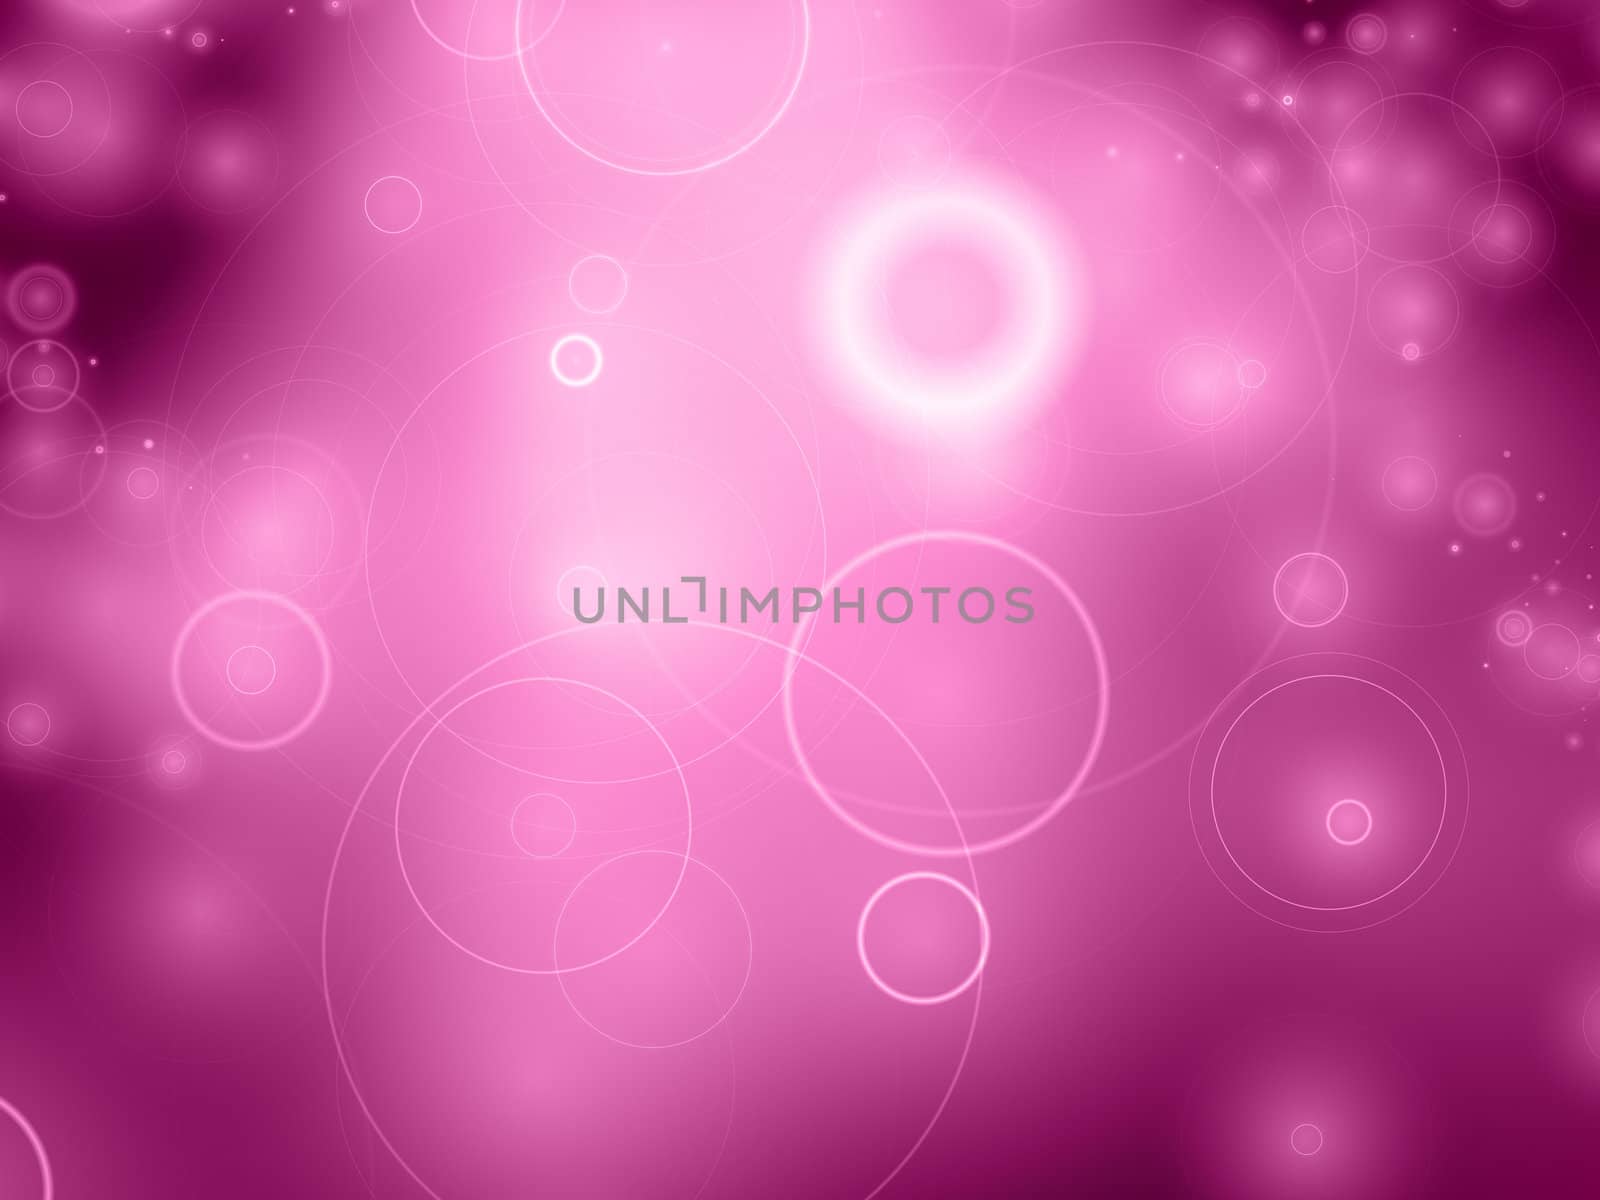 An image of a nice pink background